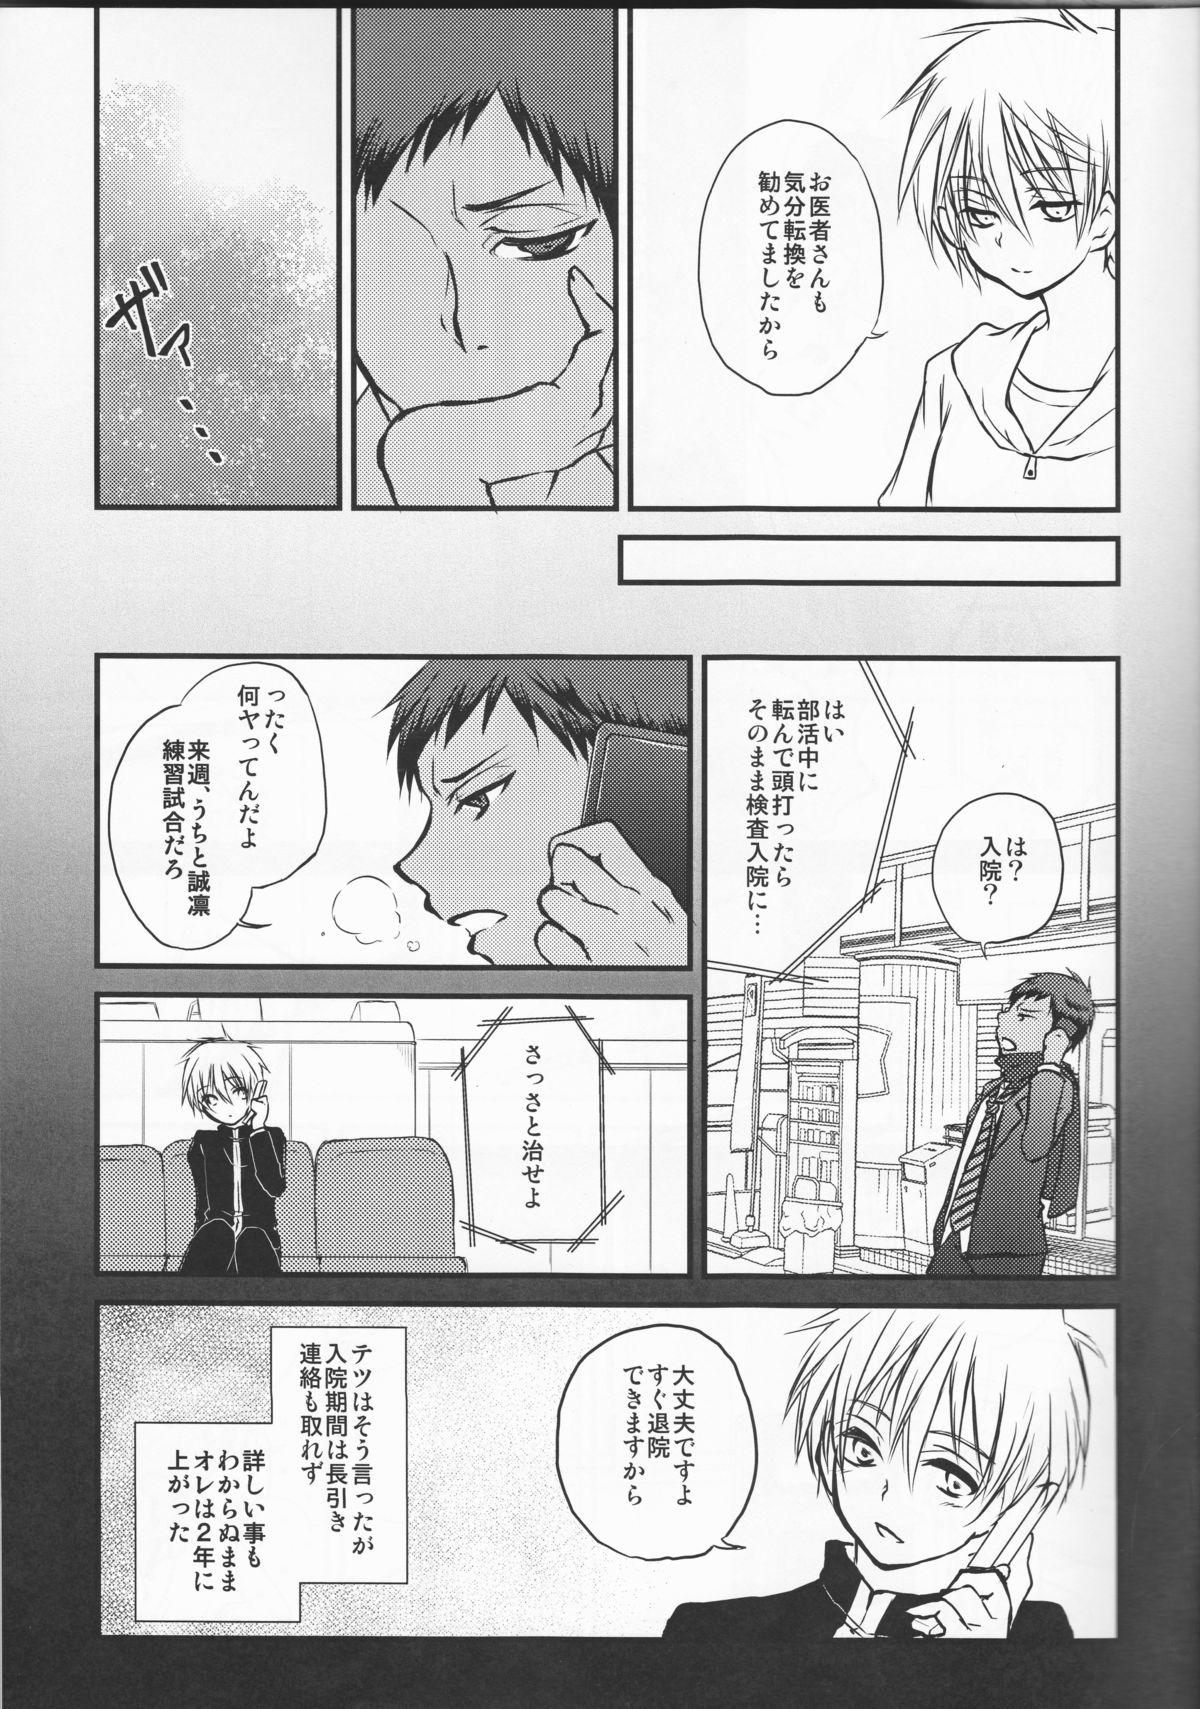 Penis Yesterday of his and her tomorrow - Kuroko no basuke Public Sex - Page 5